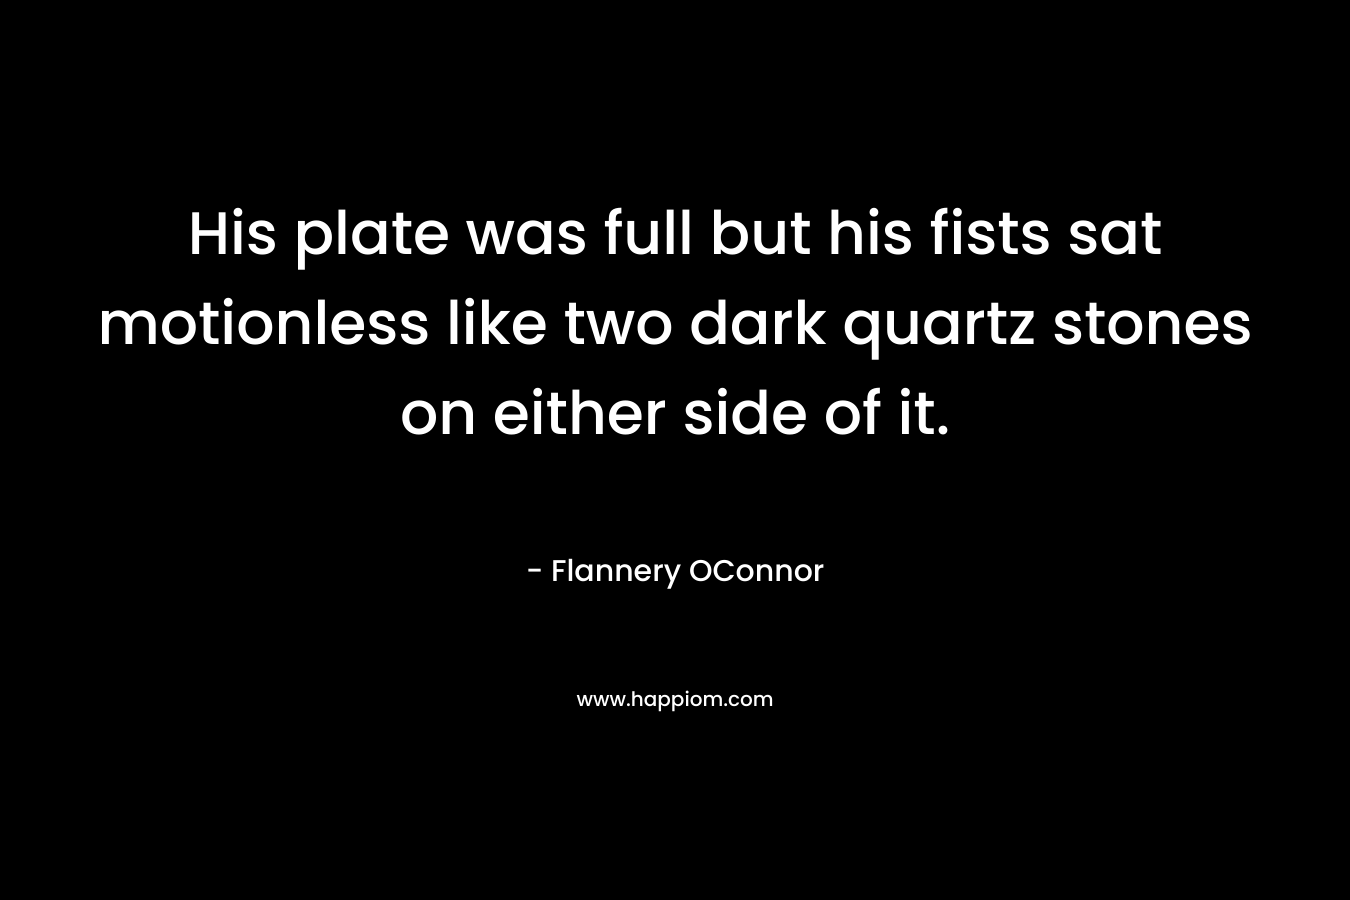 His plate was full but his fists sat motionless like two dark quartz stones on either side of it. – Flannery OConnor